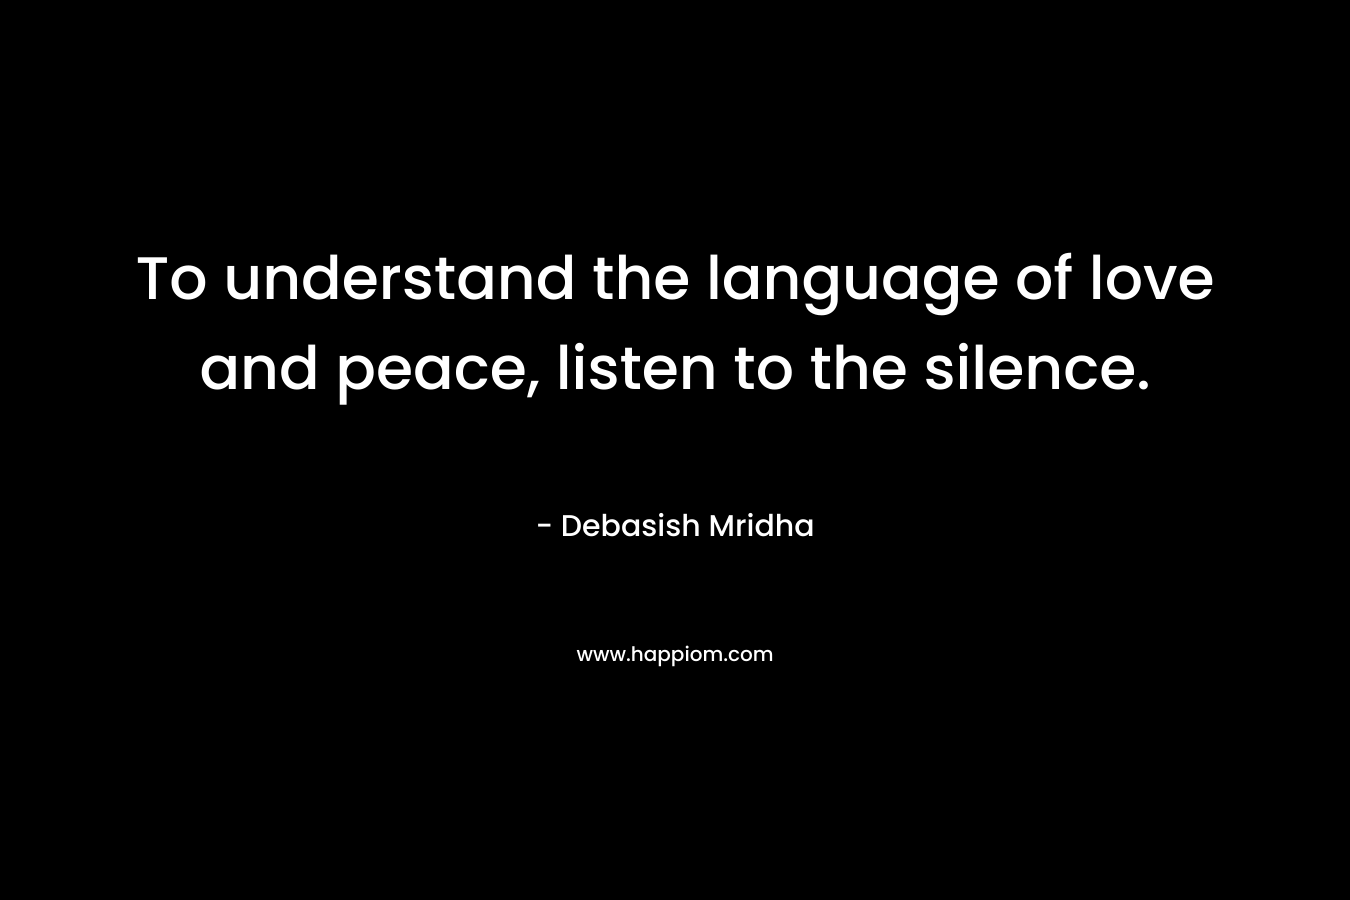 To understand the language of love and peace, listen to the silence.